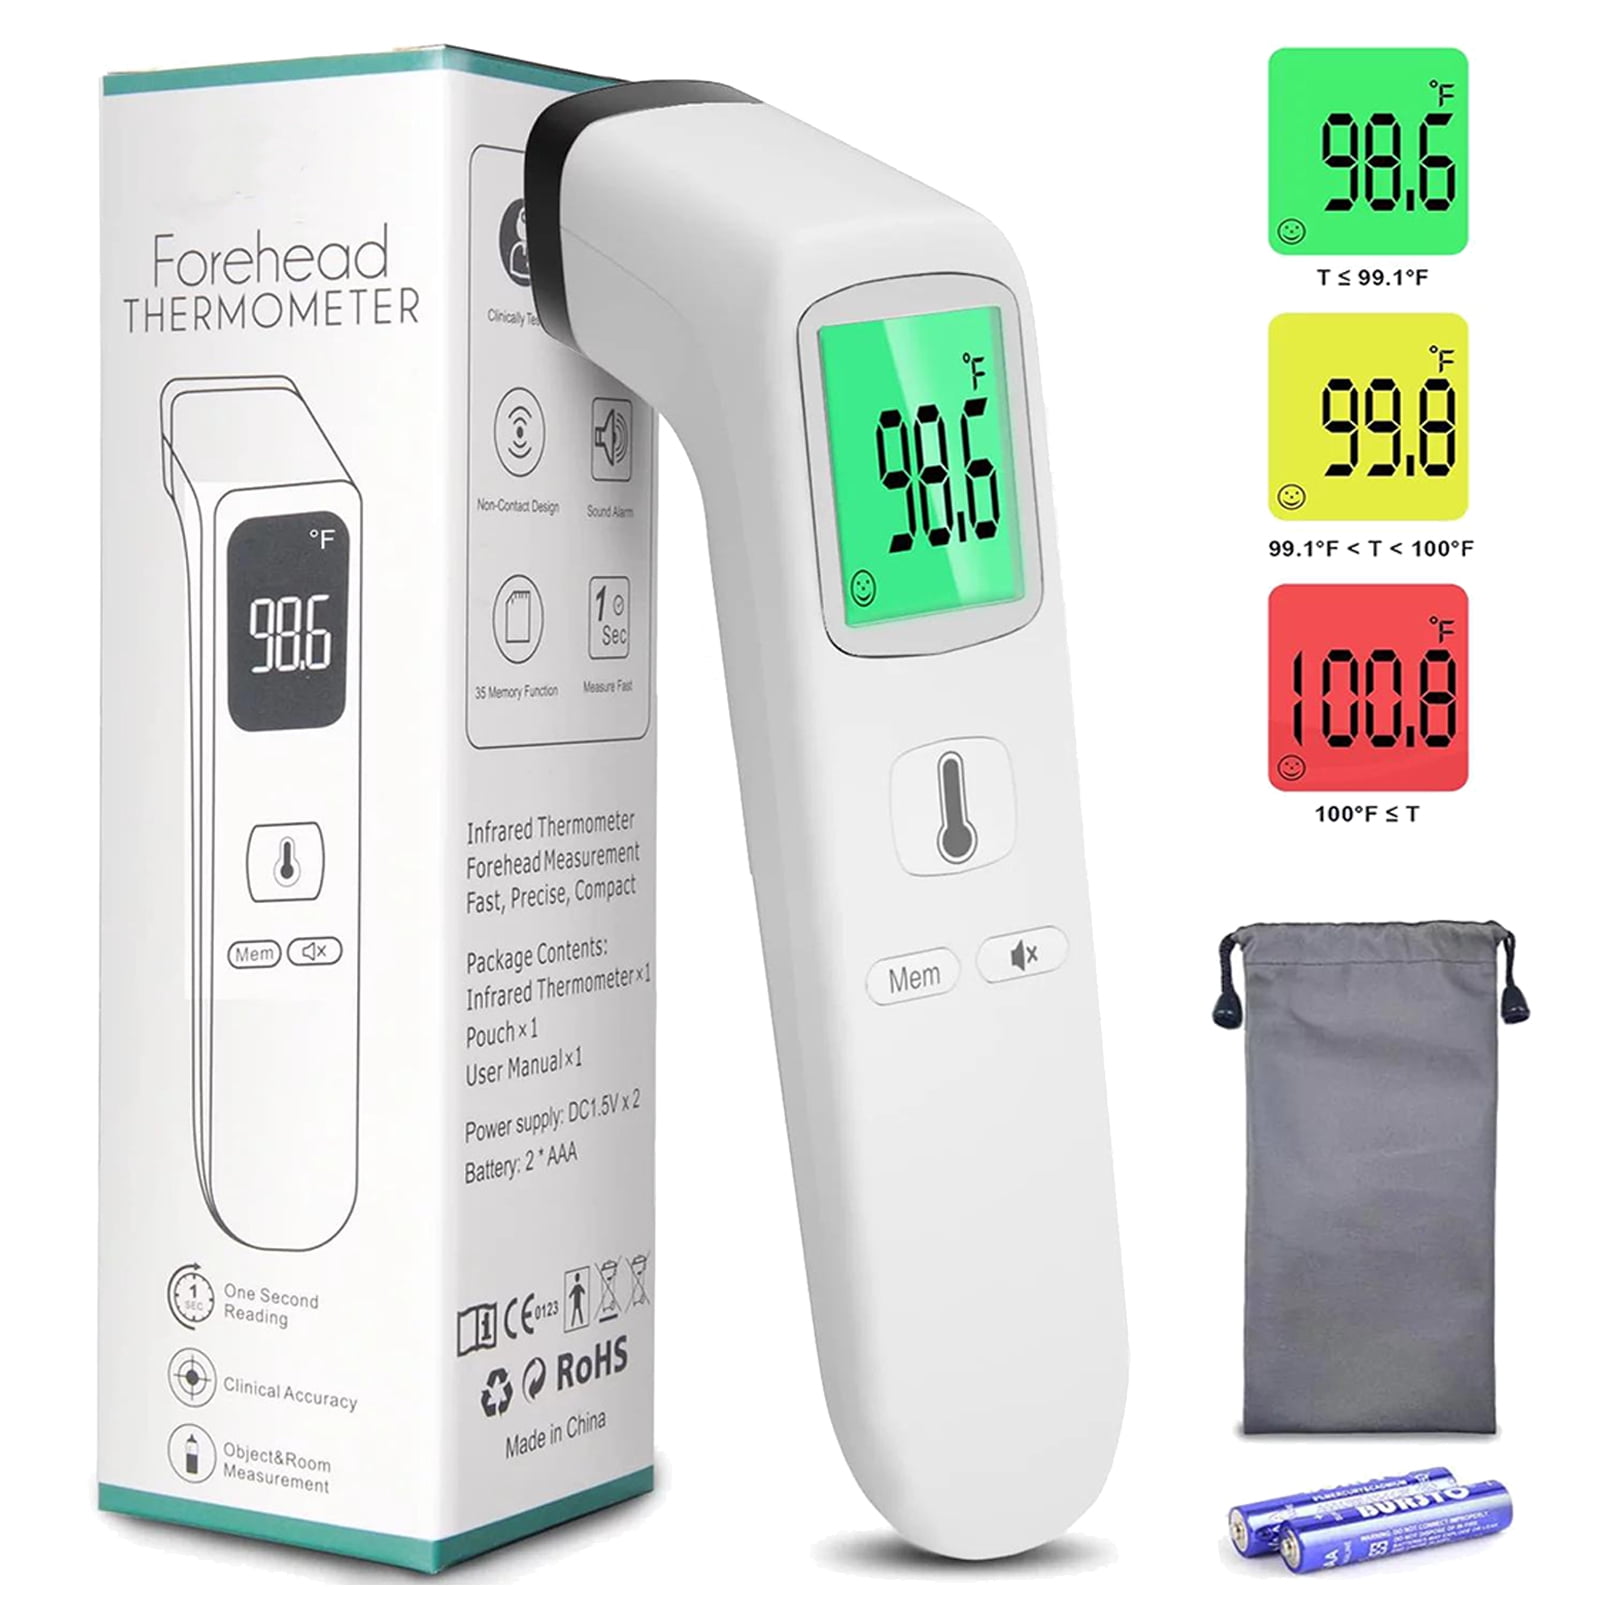 Baby Thermometer Non Contact Infrared Digital Thermometer with Instant Reading Fever Alarm Function Delivery from US Techvilla Forehead Thermometer 